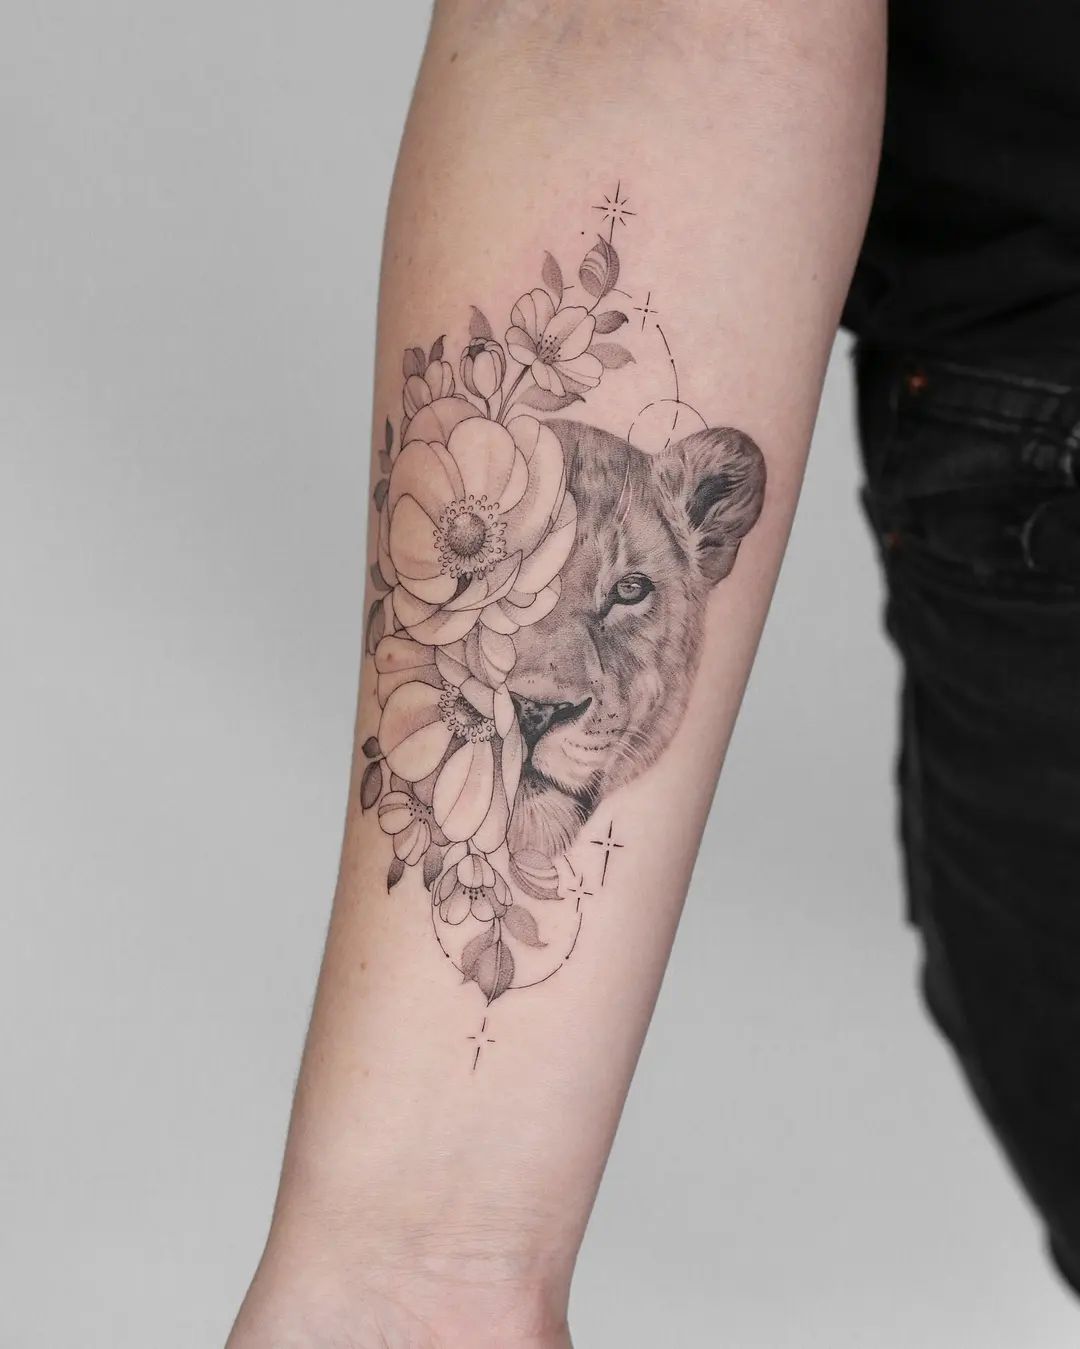 50 Powerful Lion Tattoo Ideas to Enhance Your Personality  Trendy tattoos Lion  tattoo with flowers Ink tattoo